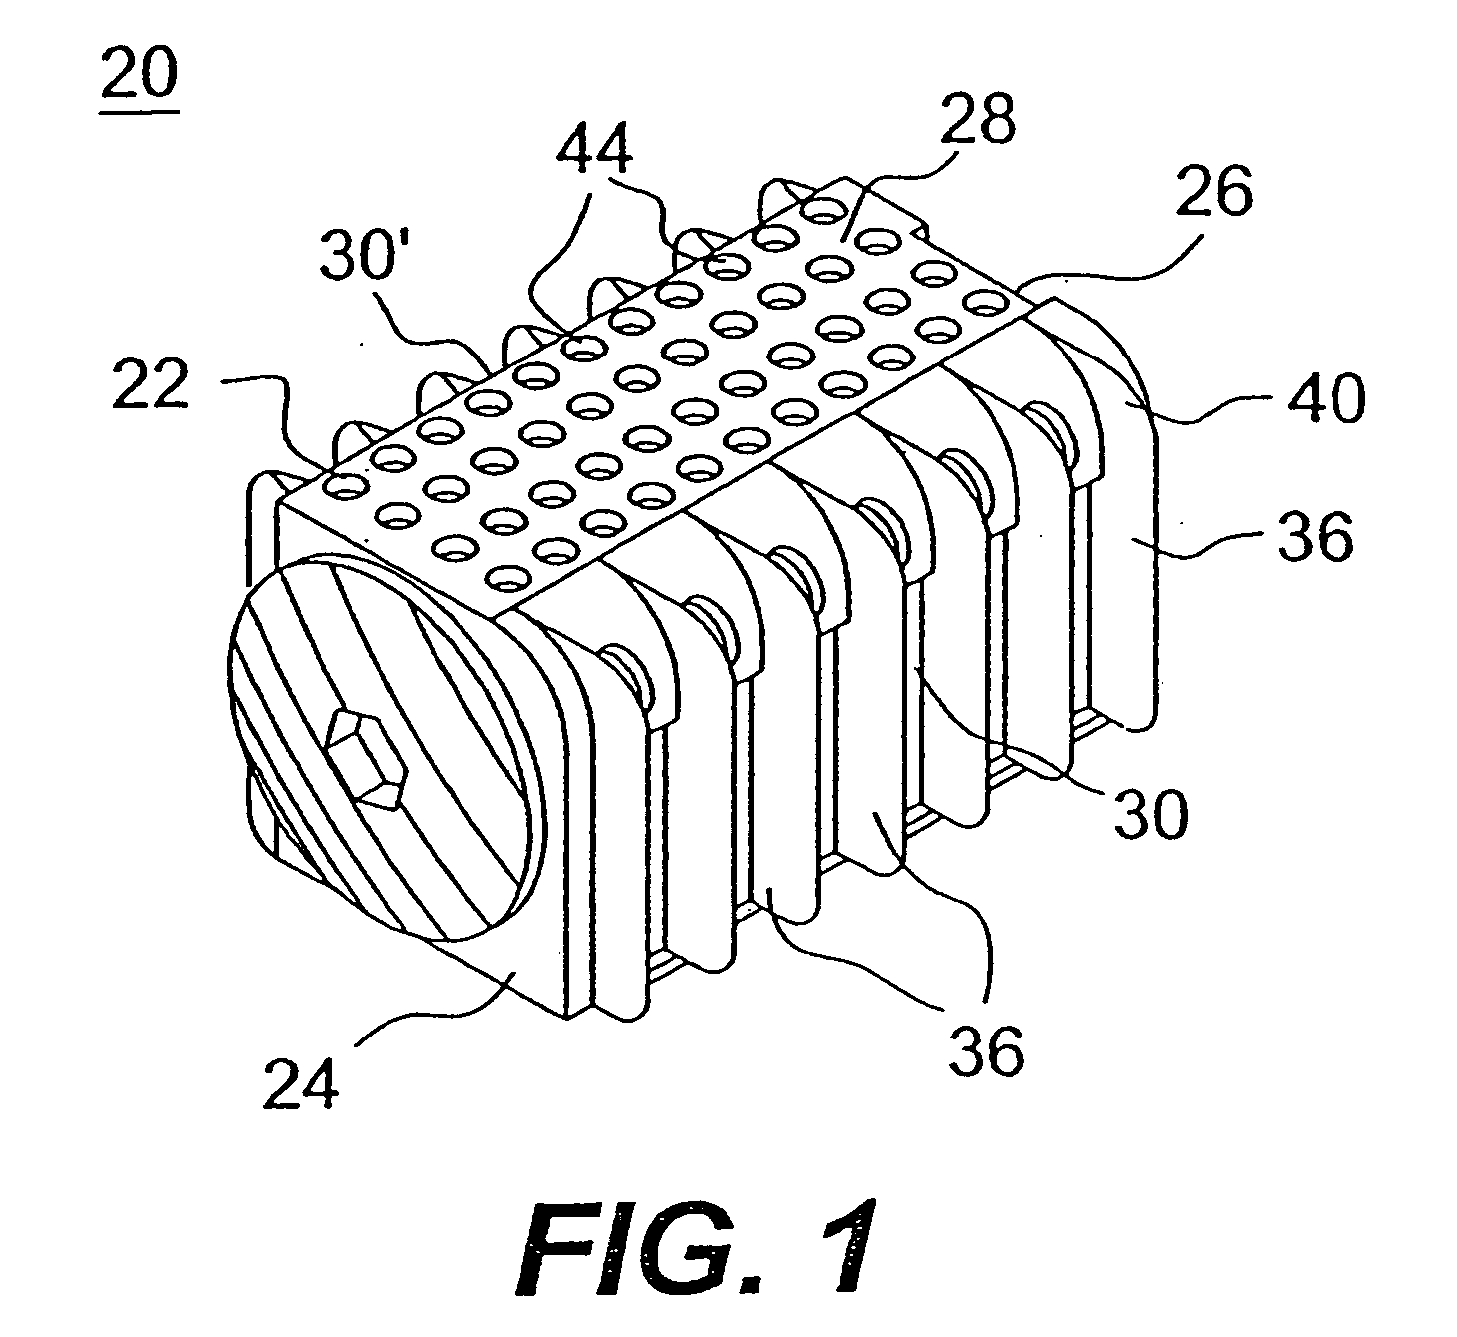 Method for inserting a fusion cage having a height substantially the same as the height between adjacent vertebral endplates